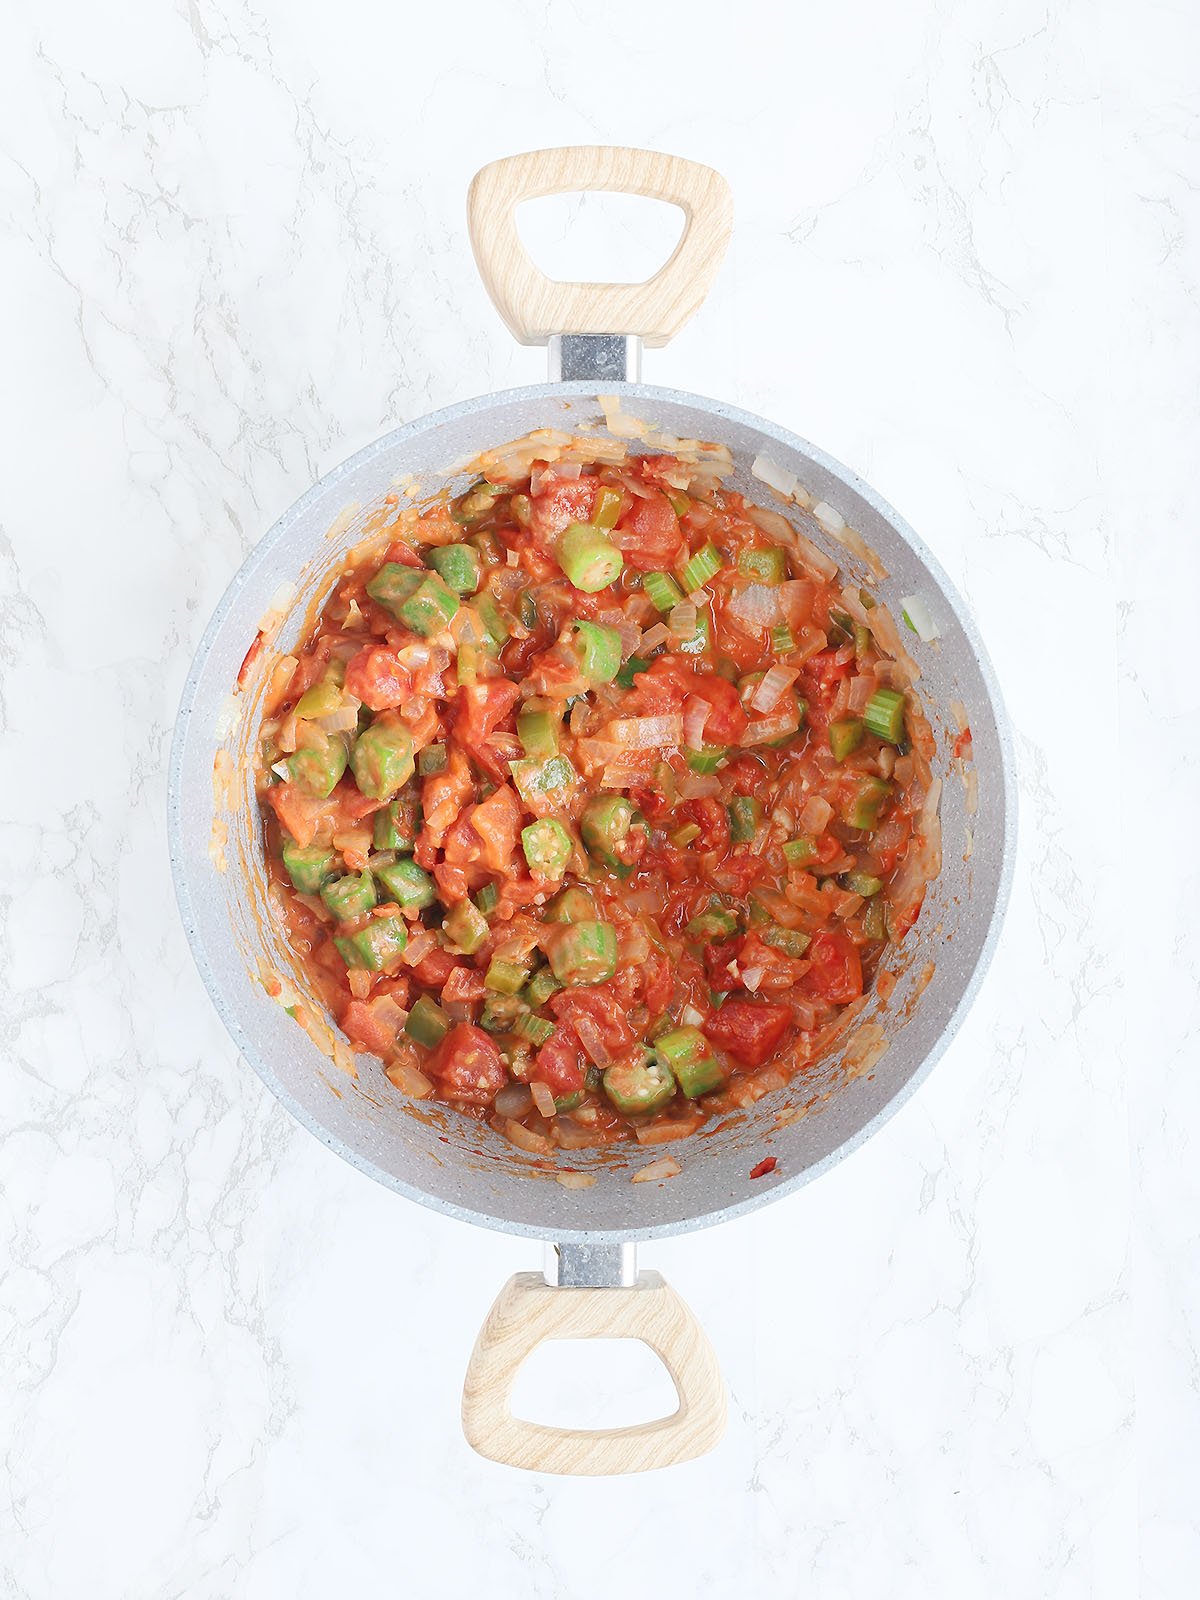 gray pot with sautéed vegetables, diced tomatoes and tomato sauce